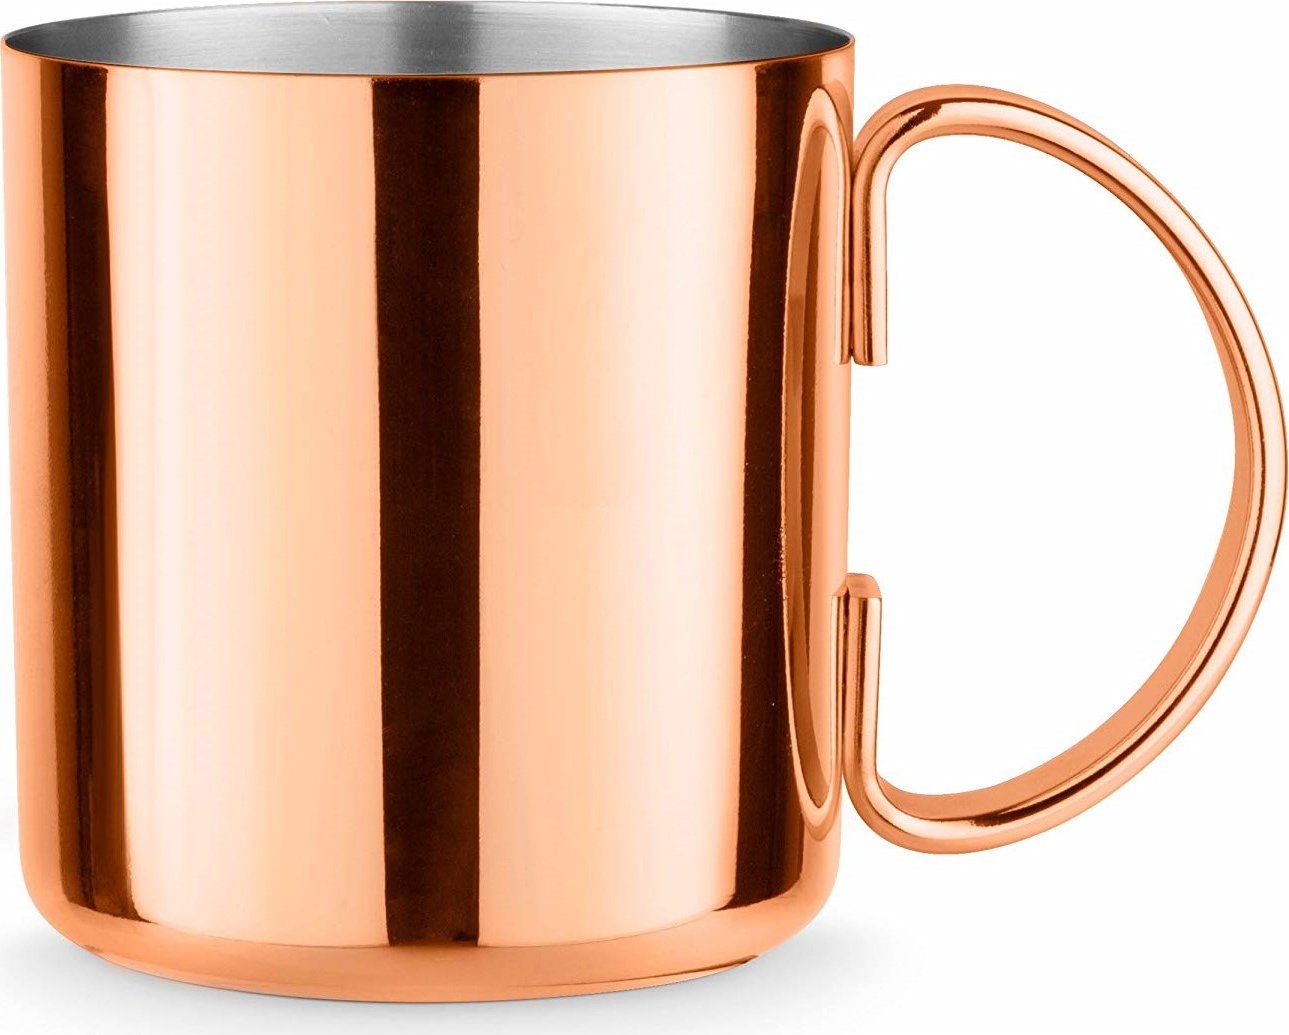 Final Touch - Moscow Mule Mug - MM480